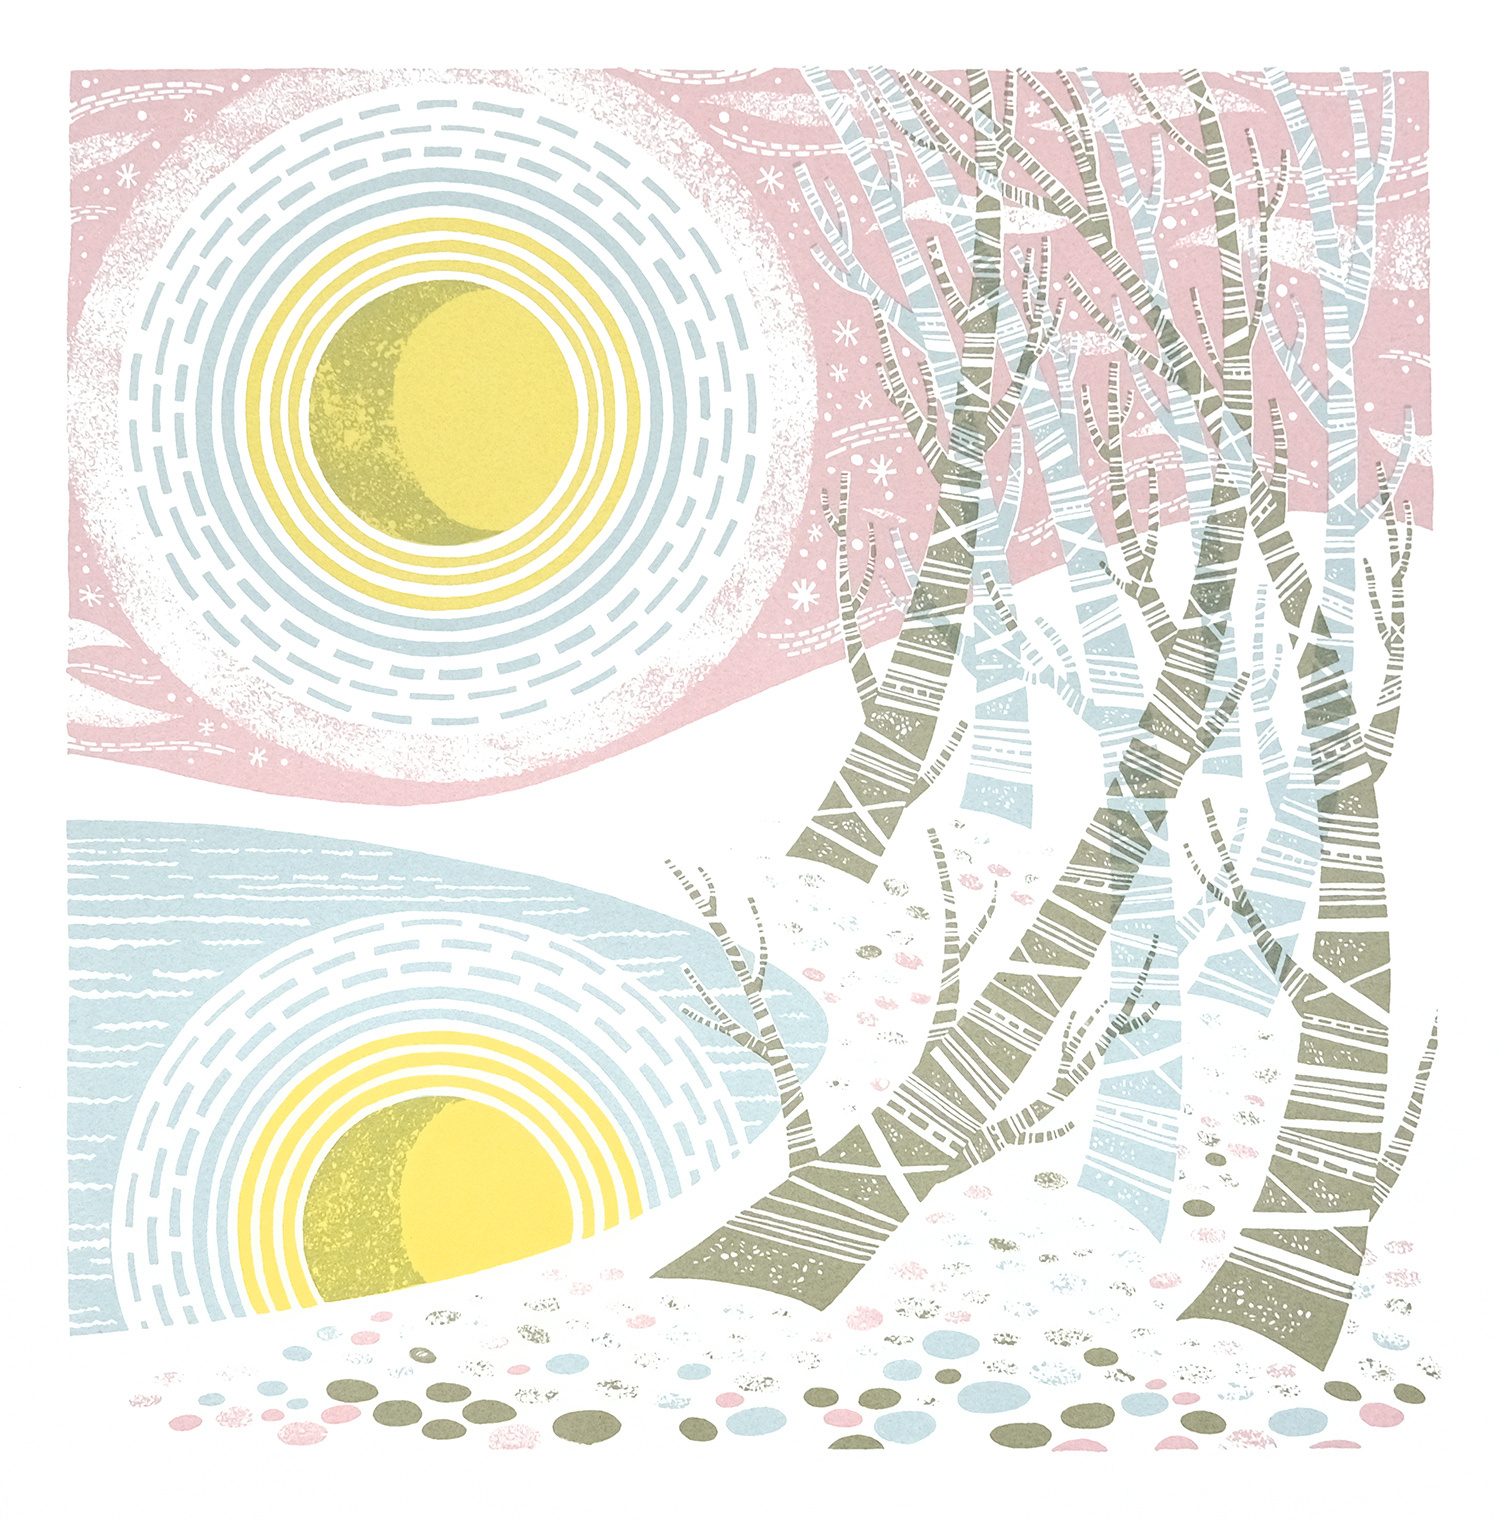 The Moon & the Trees by Angie Lewin